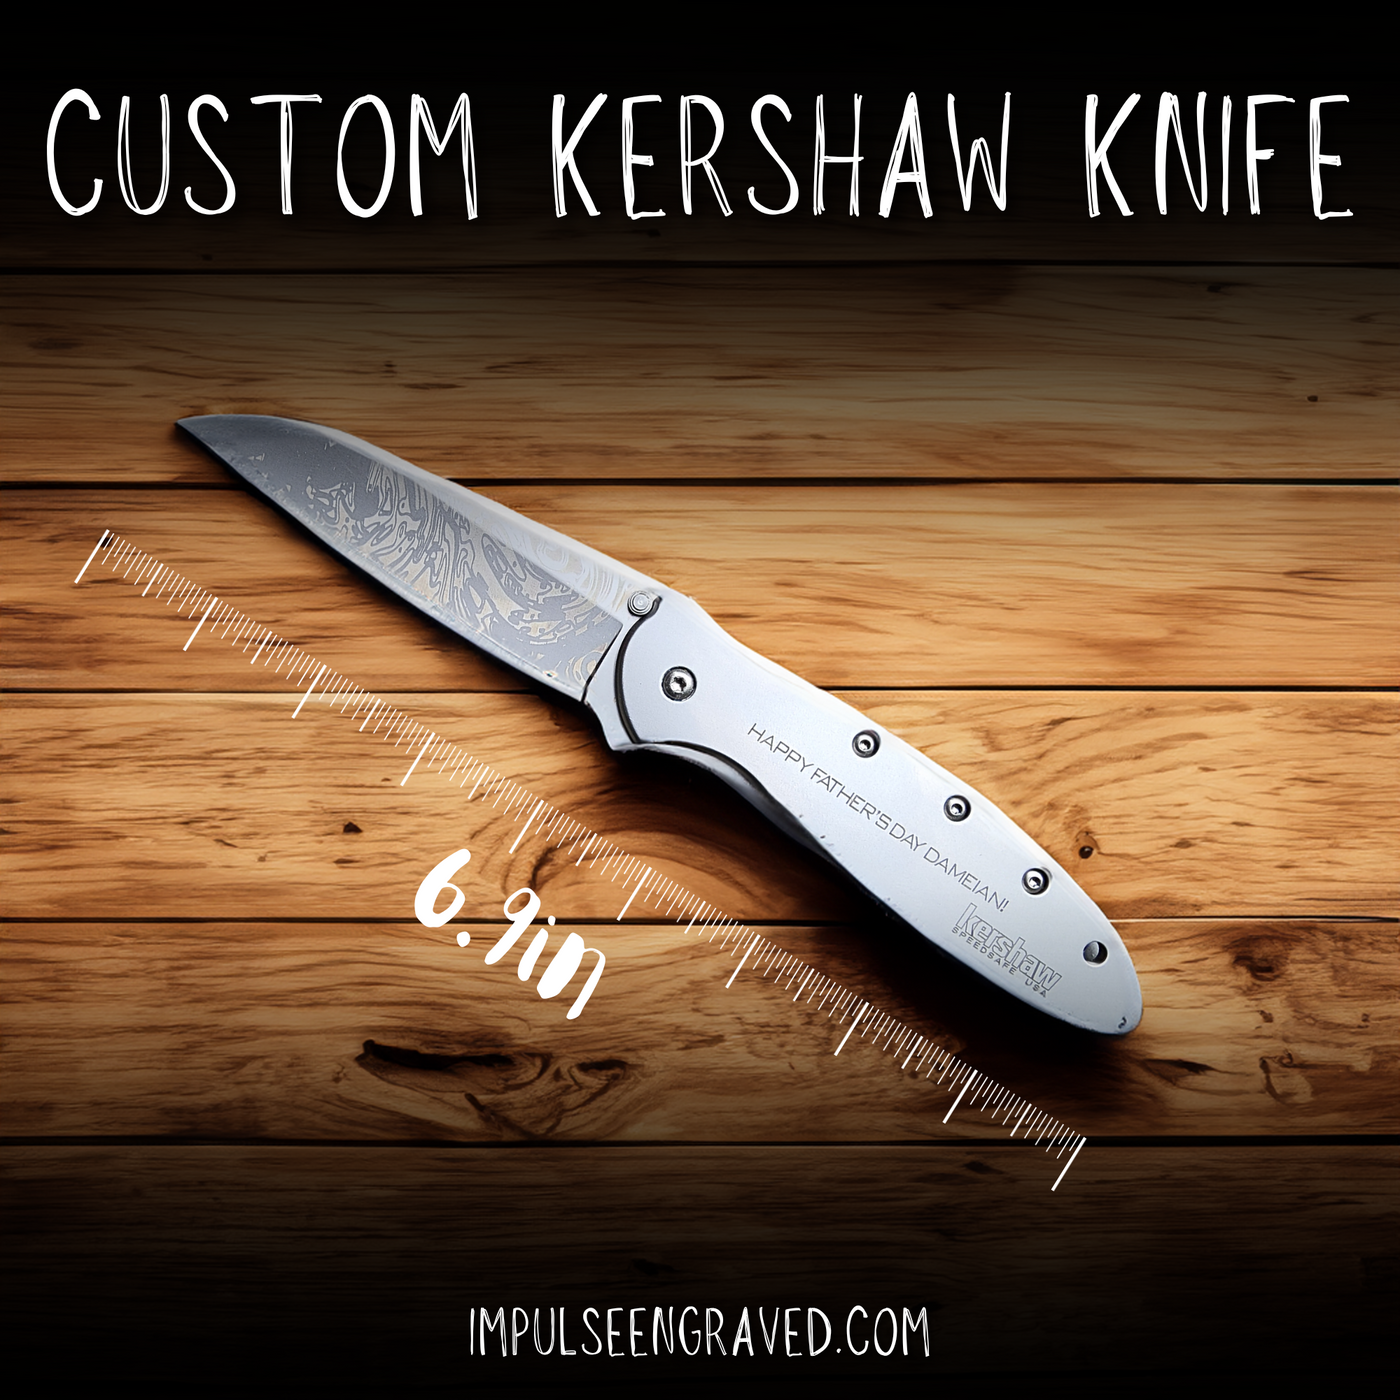 Personalized Engraved Damascus Steel Kershaw Knife with Your Custom Message - Handcrafted Gift for Him or Her